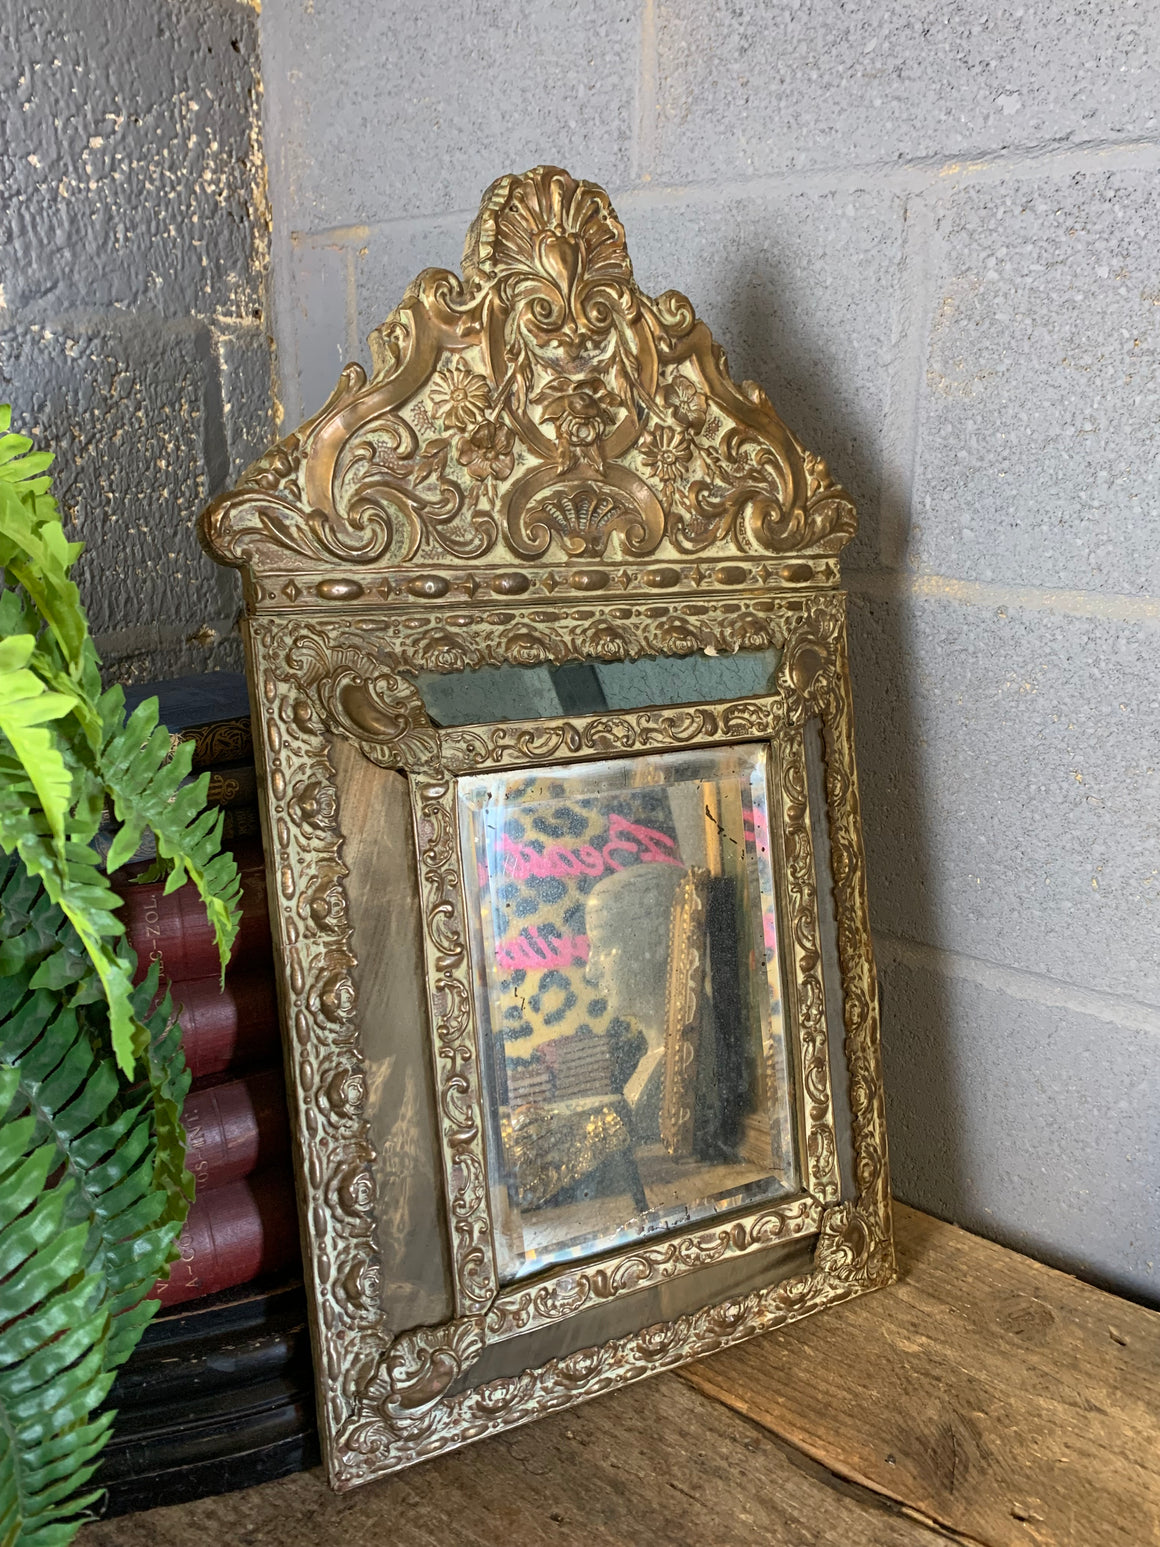 A large brass repousse mirror